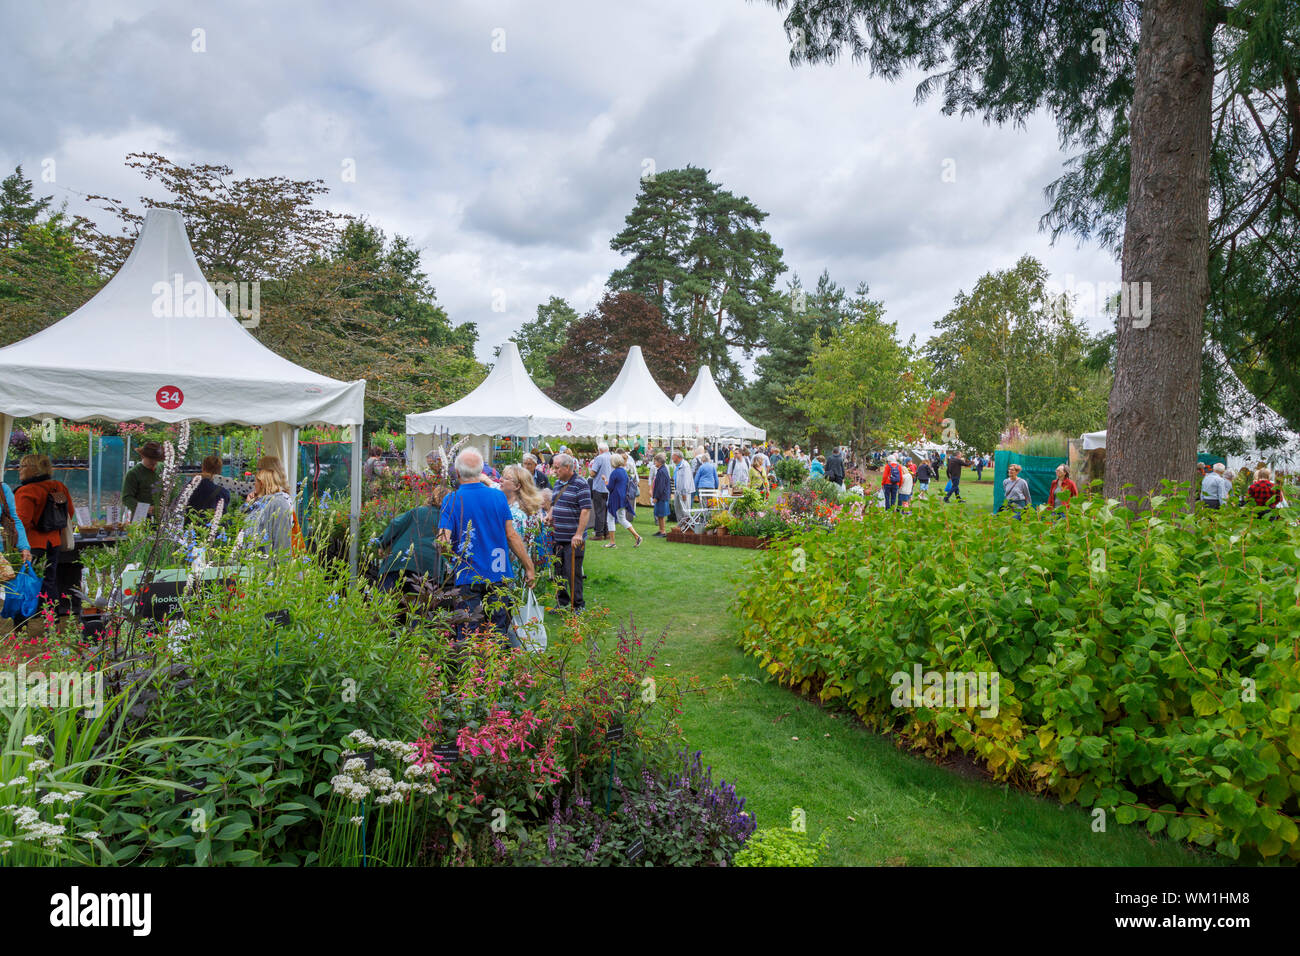 Stalls and flowers at the September 2019 Wisley Garden Flower Show at RHS Garden Wisley, Surrey, south-east England Stock Photo